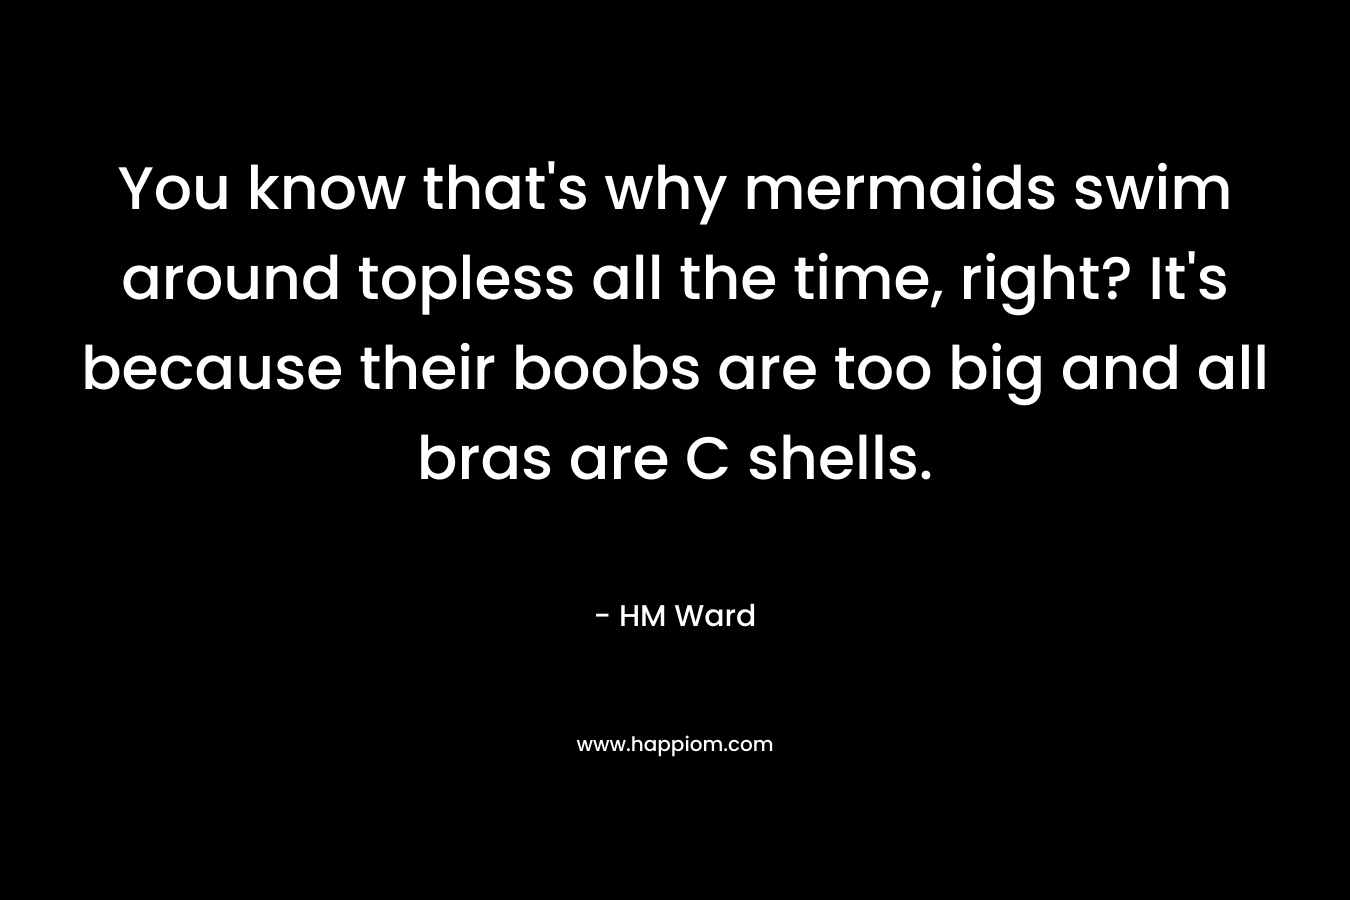 You know that’s why mermaids swim around topless all the time, right? It’s because their boobs are too big and all bras are C shells. – HM Ward